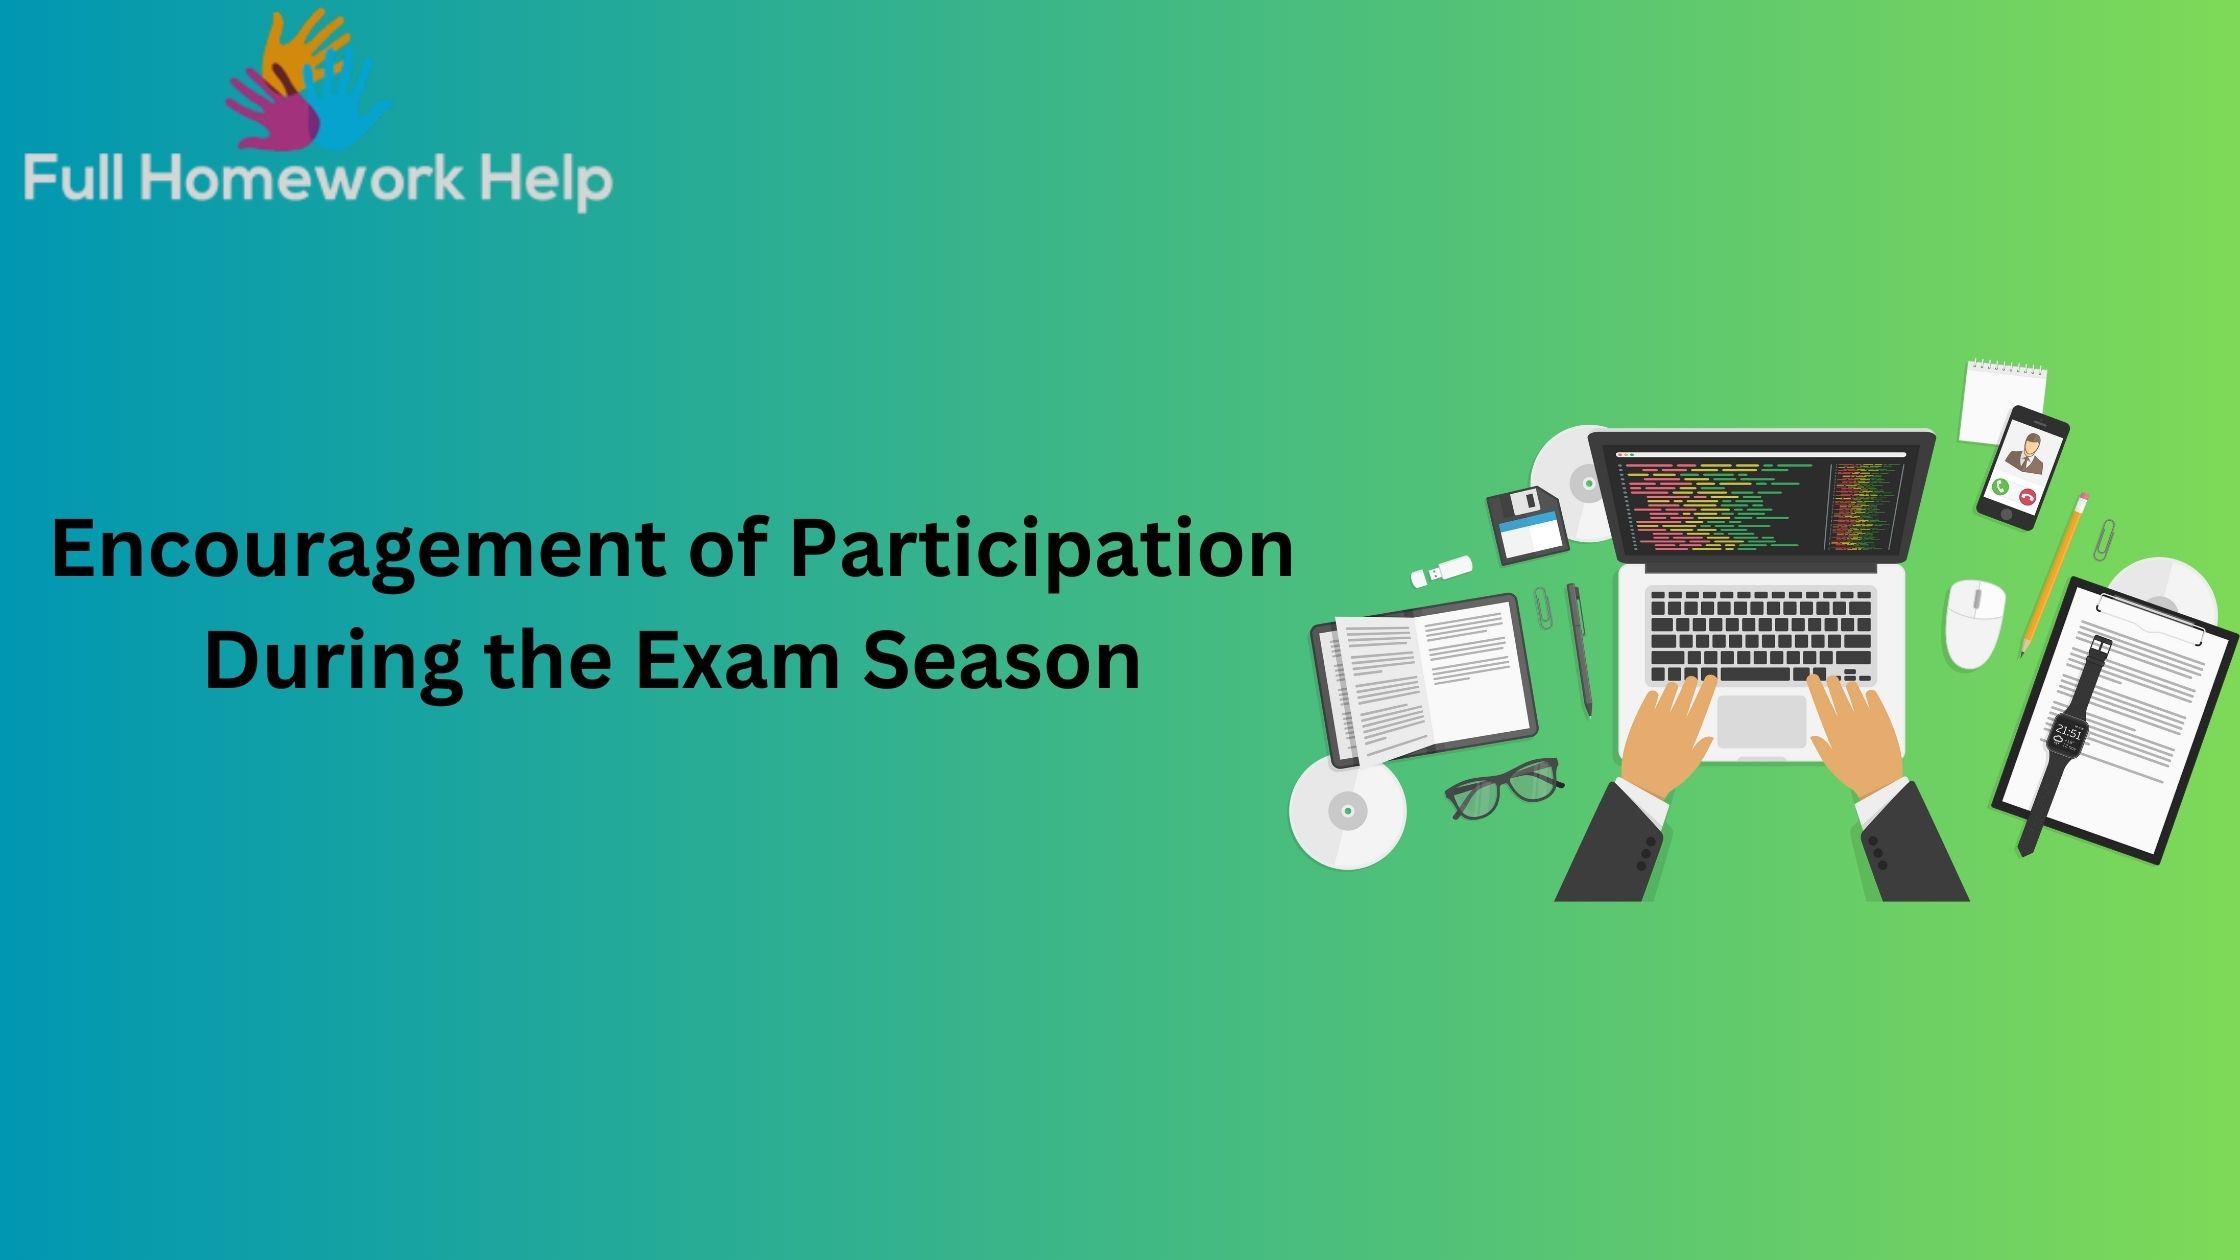 Encouragement of Participation During the Exam Season